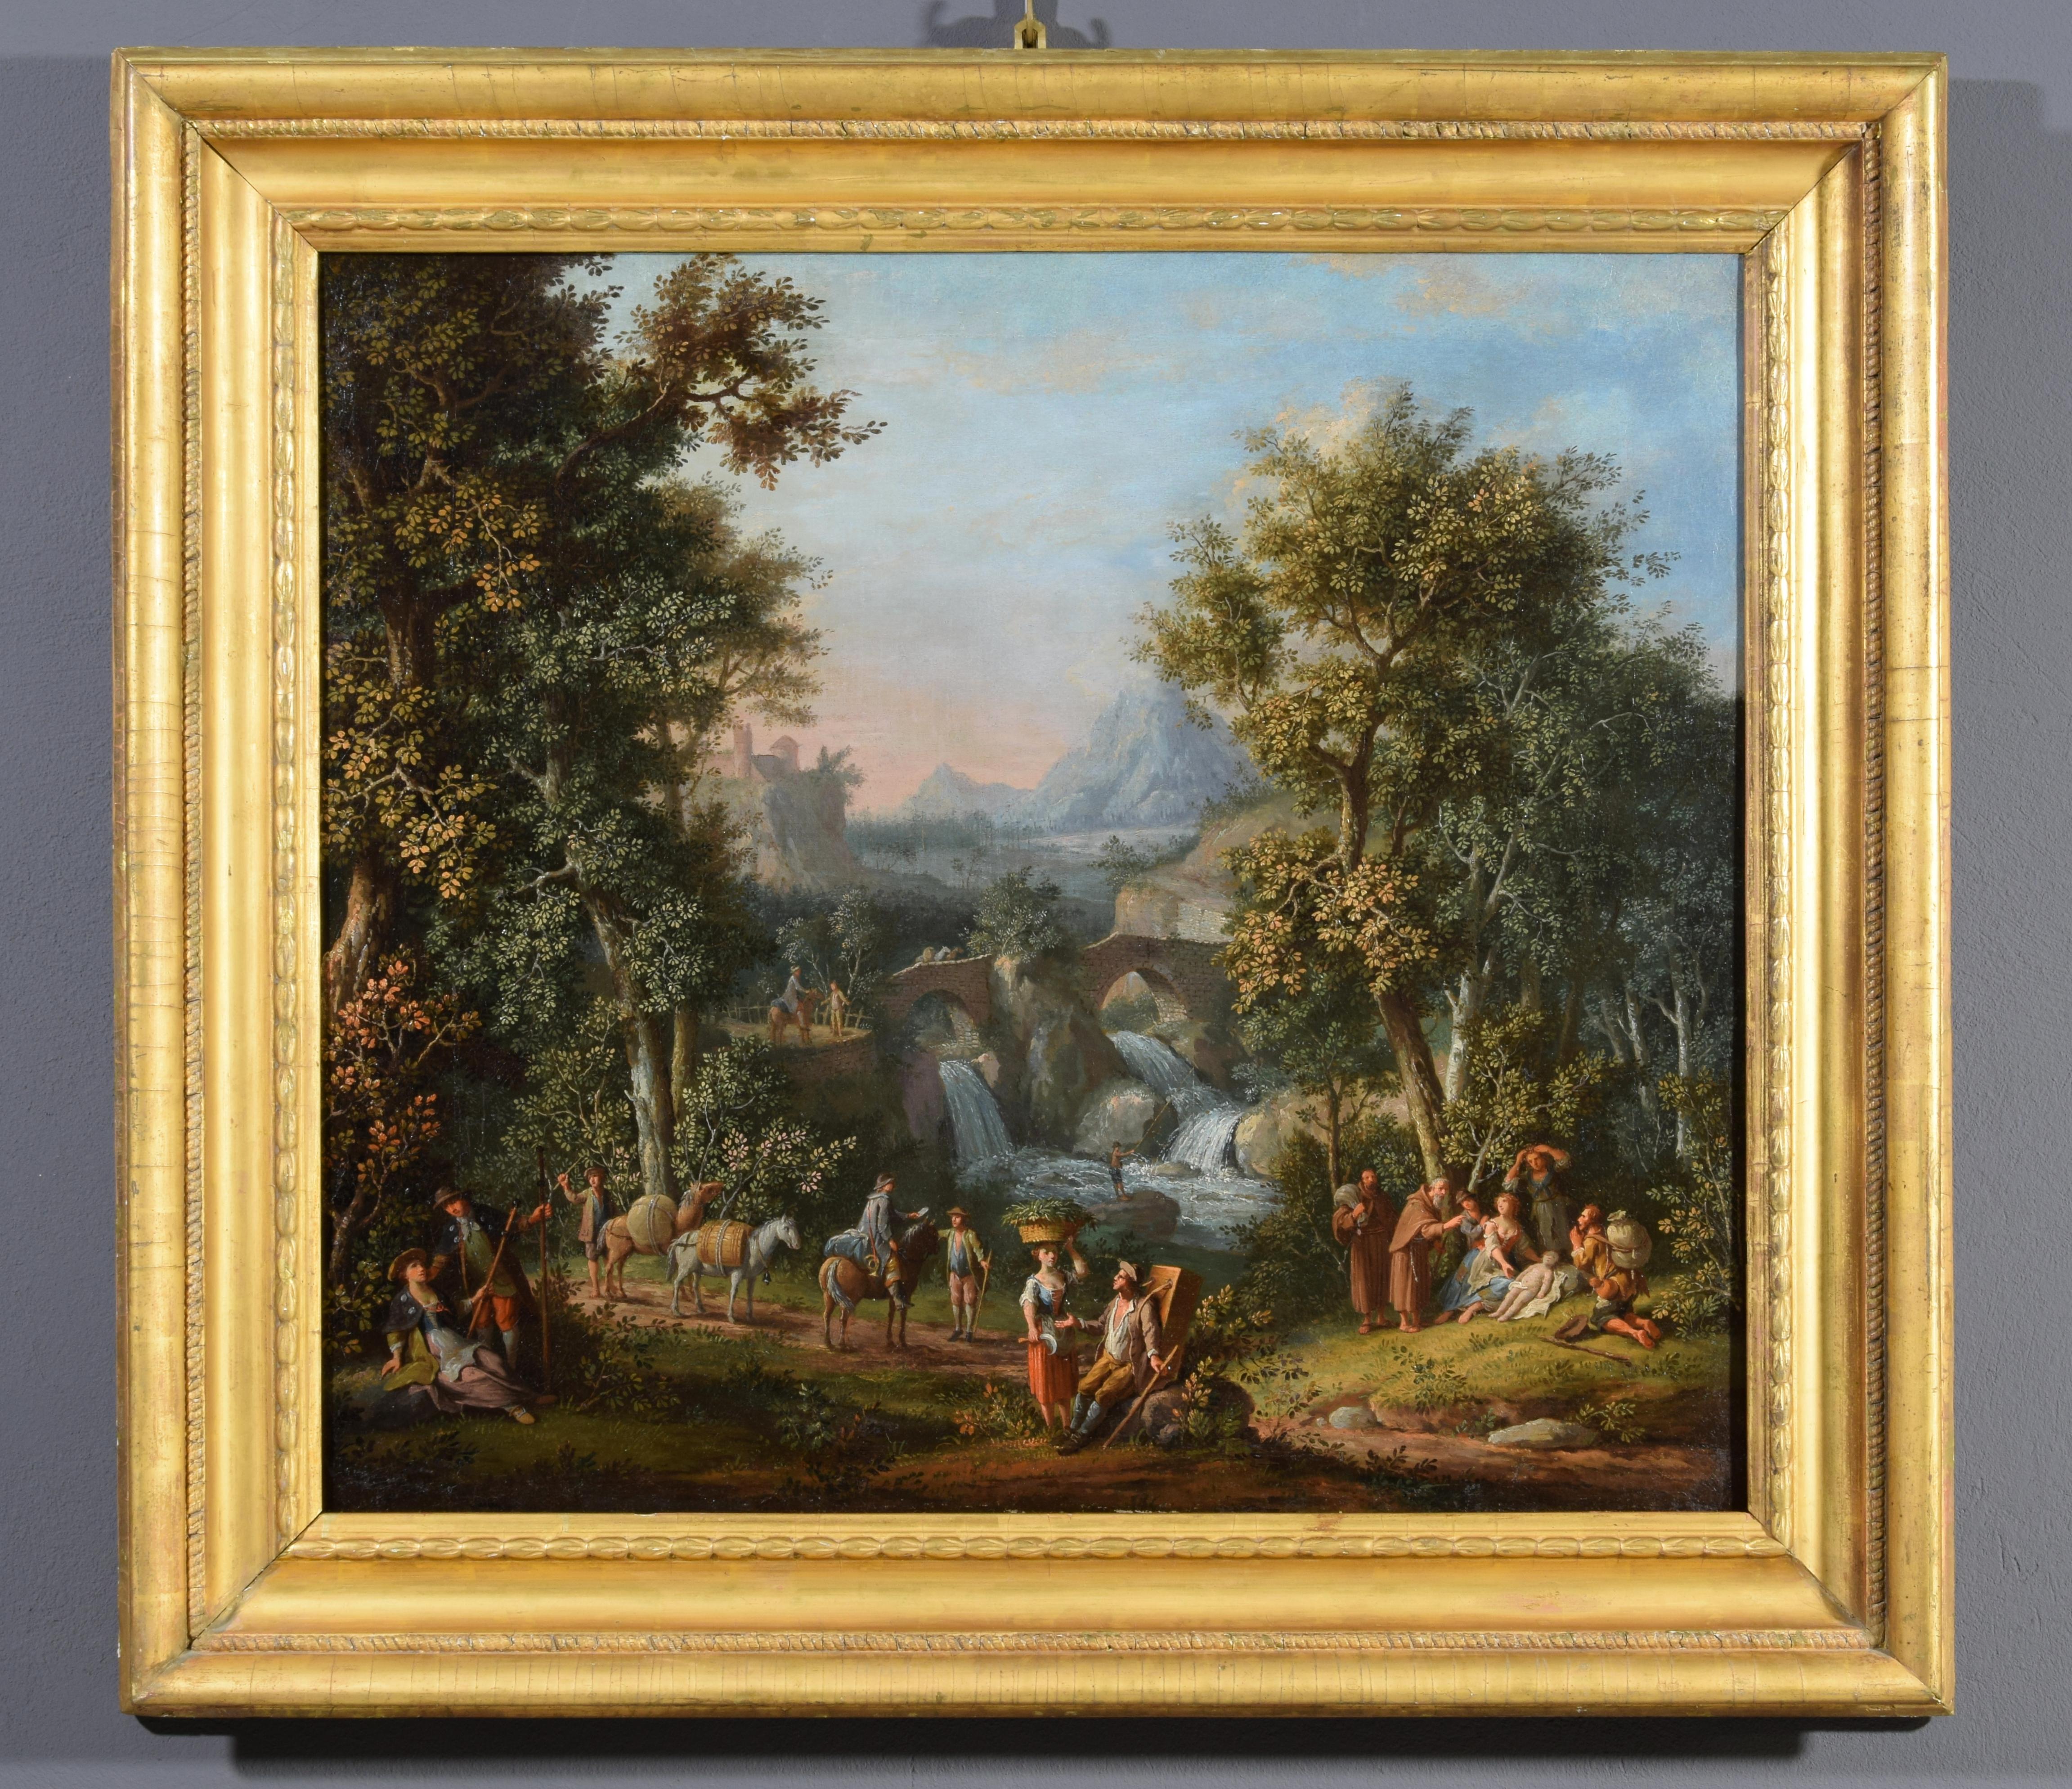 Giovanni Battista Innocenzo Colomba (1713 – 1793)
Landscape with figures 
Oil on canvas, Frame H 102 x L 112 x P 8; canvas H 77 x L 87

The valuable painting, attributable to the painter Giovanni Battista Innocenzo Colomba (1713 - 1793), depicts a